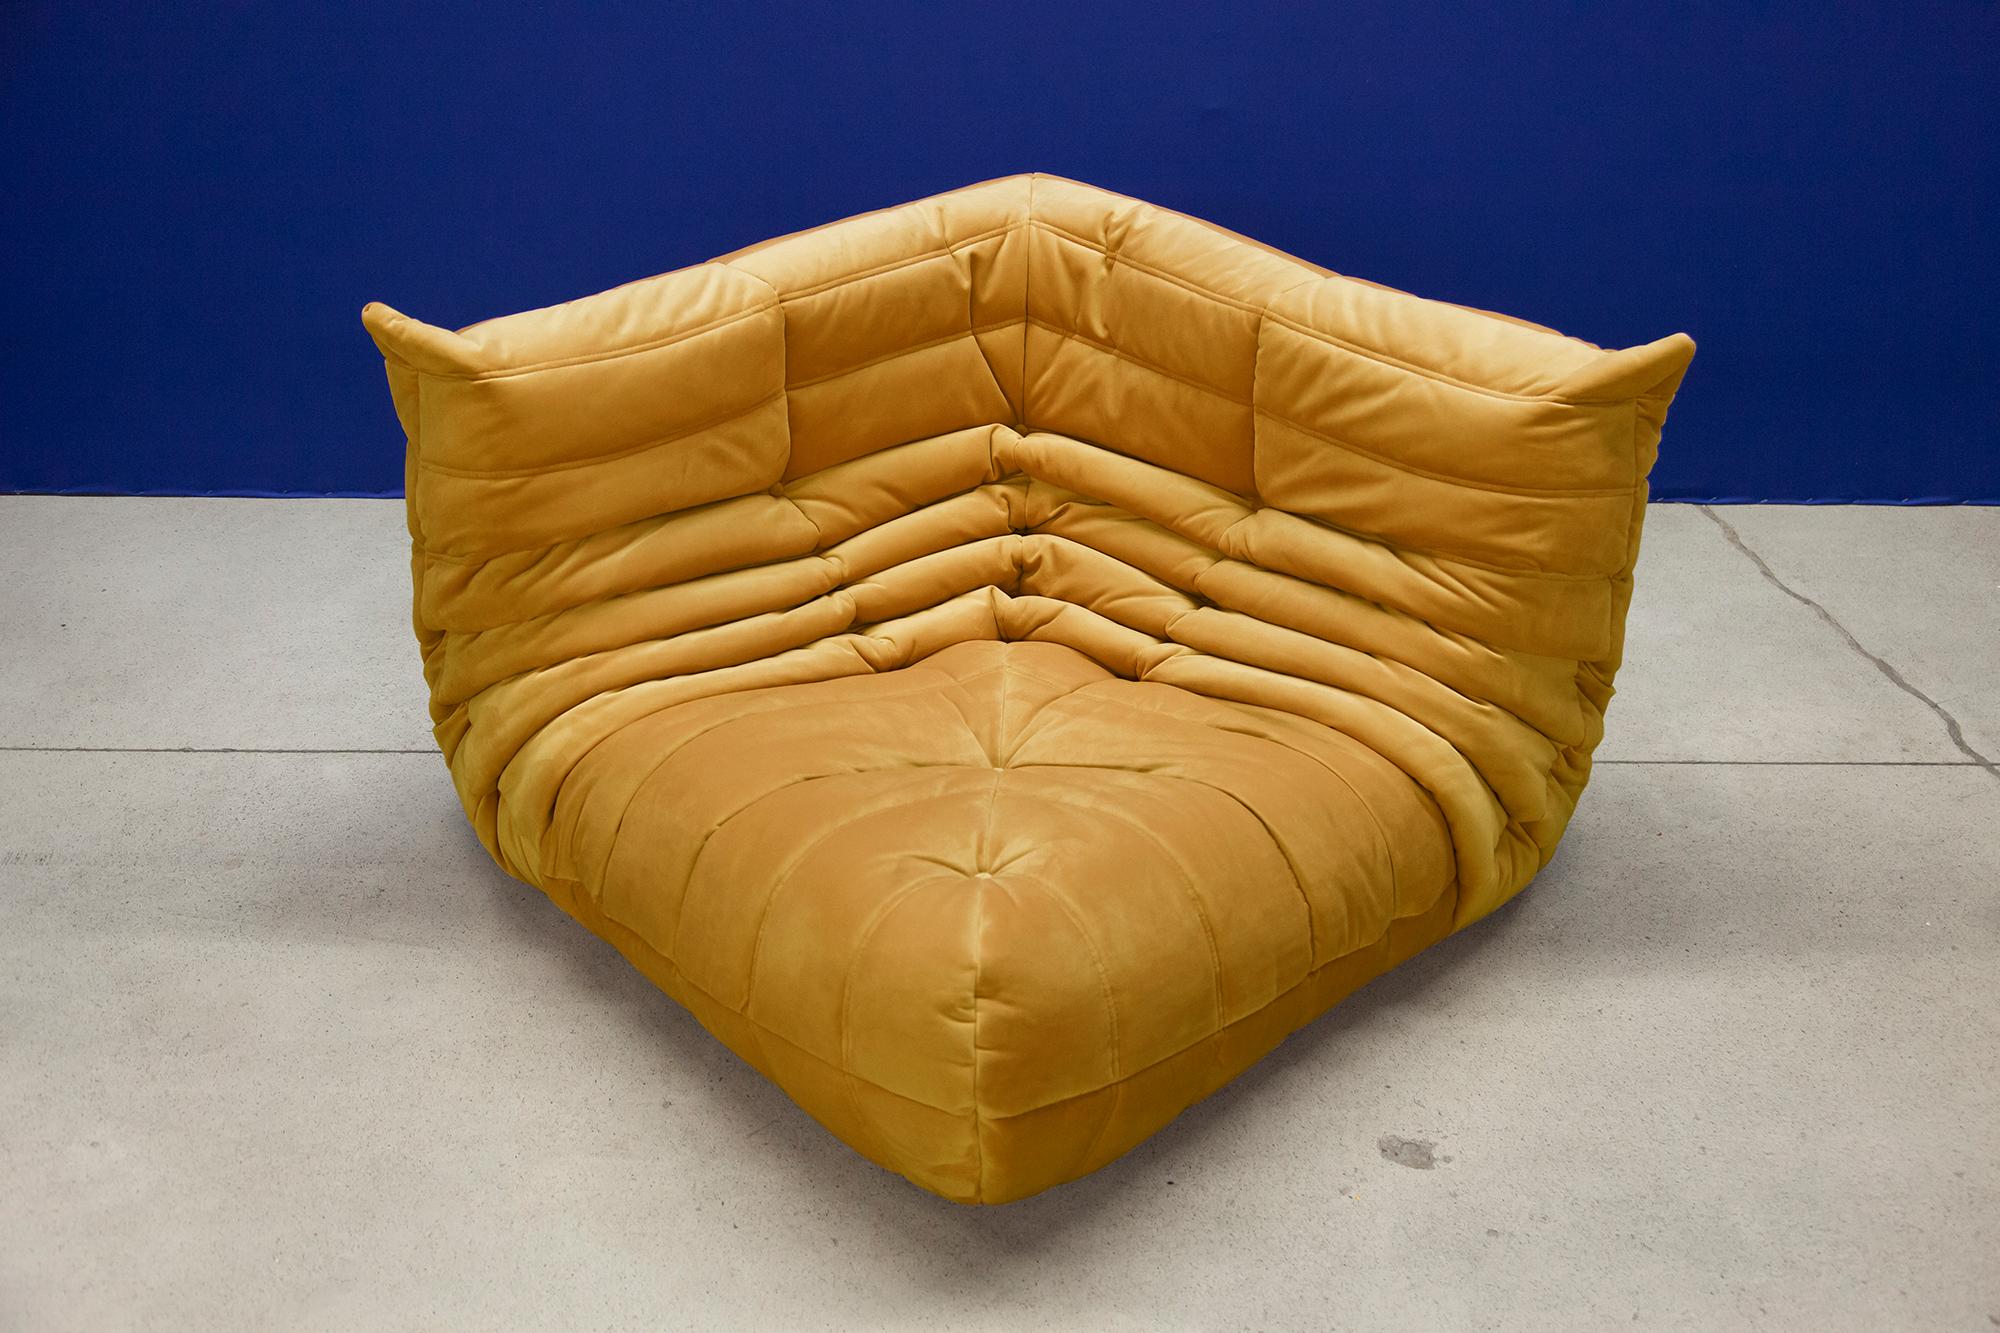 This Togo corner couch was designed by Michel Ducaroy in 1973 and was manufactured by Ligne Roset in France. It has been reupholstered in new golden yellow velvet (102 x 102 x 70 cm). It has the original Ligne Roset logo and genuine Ligne Roset